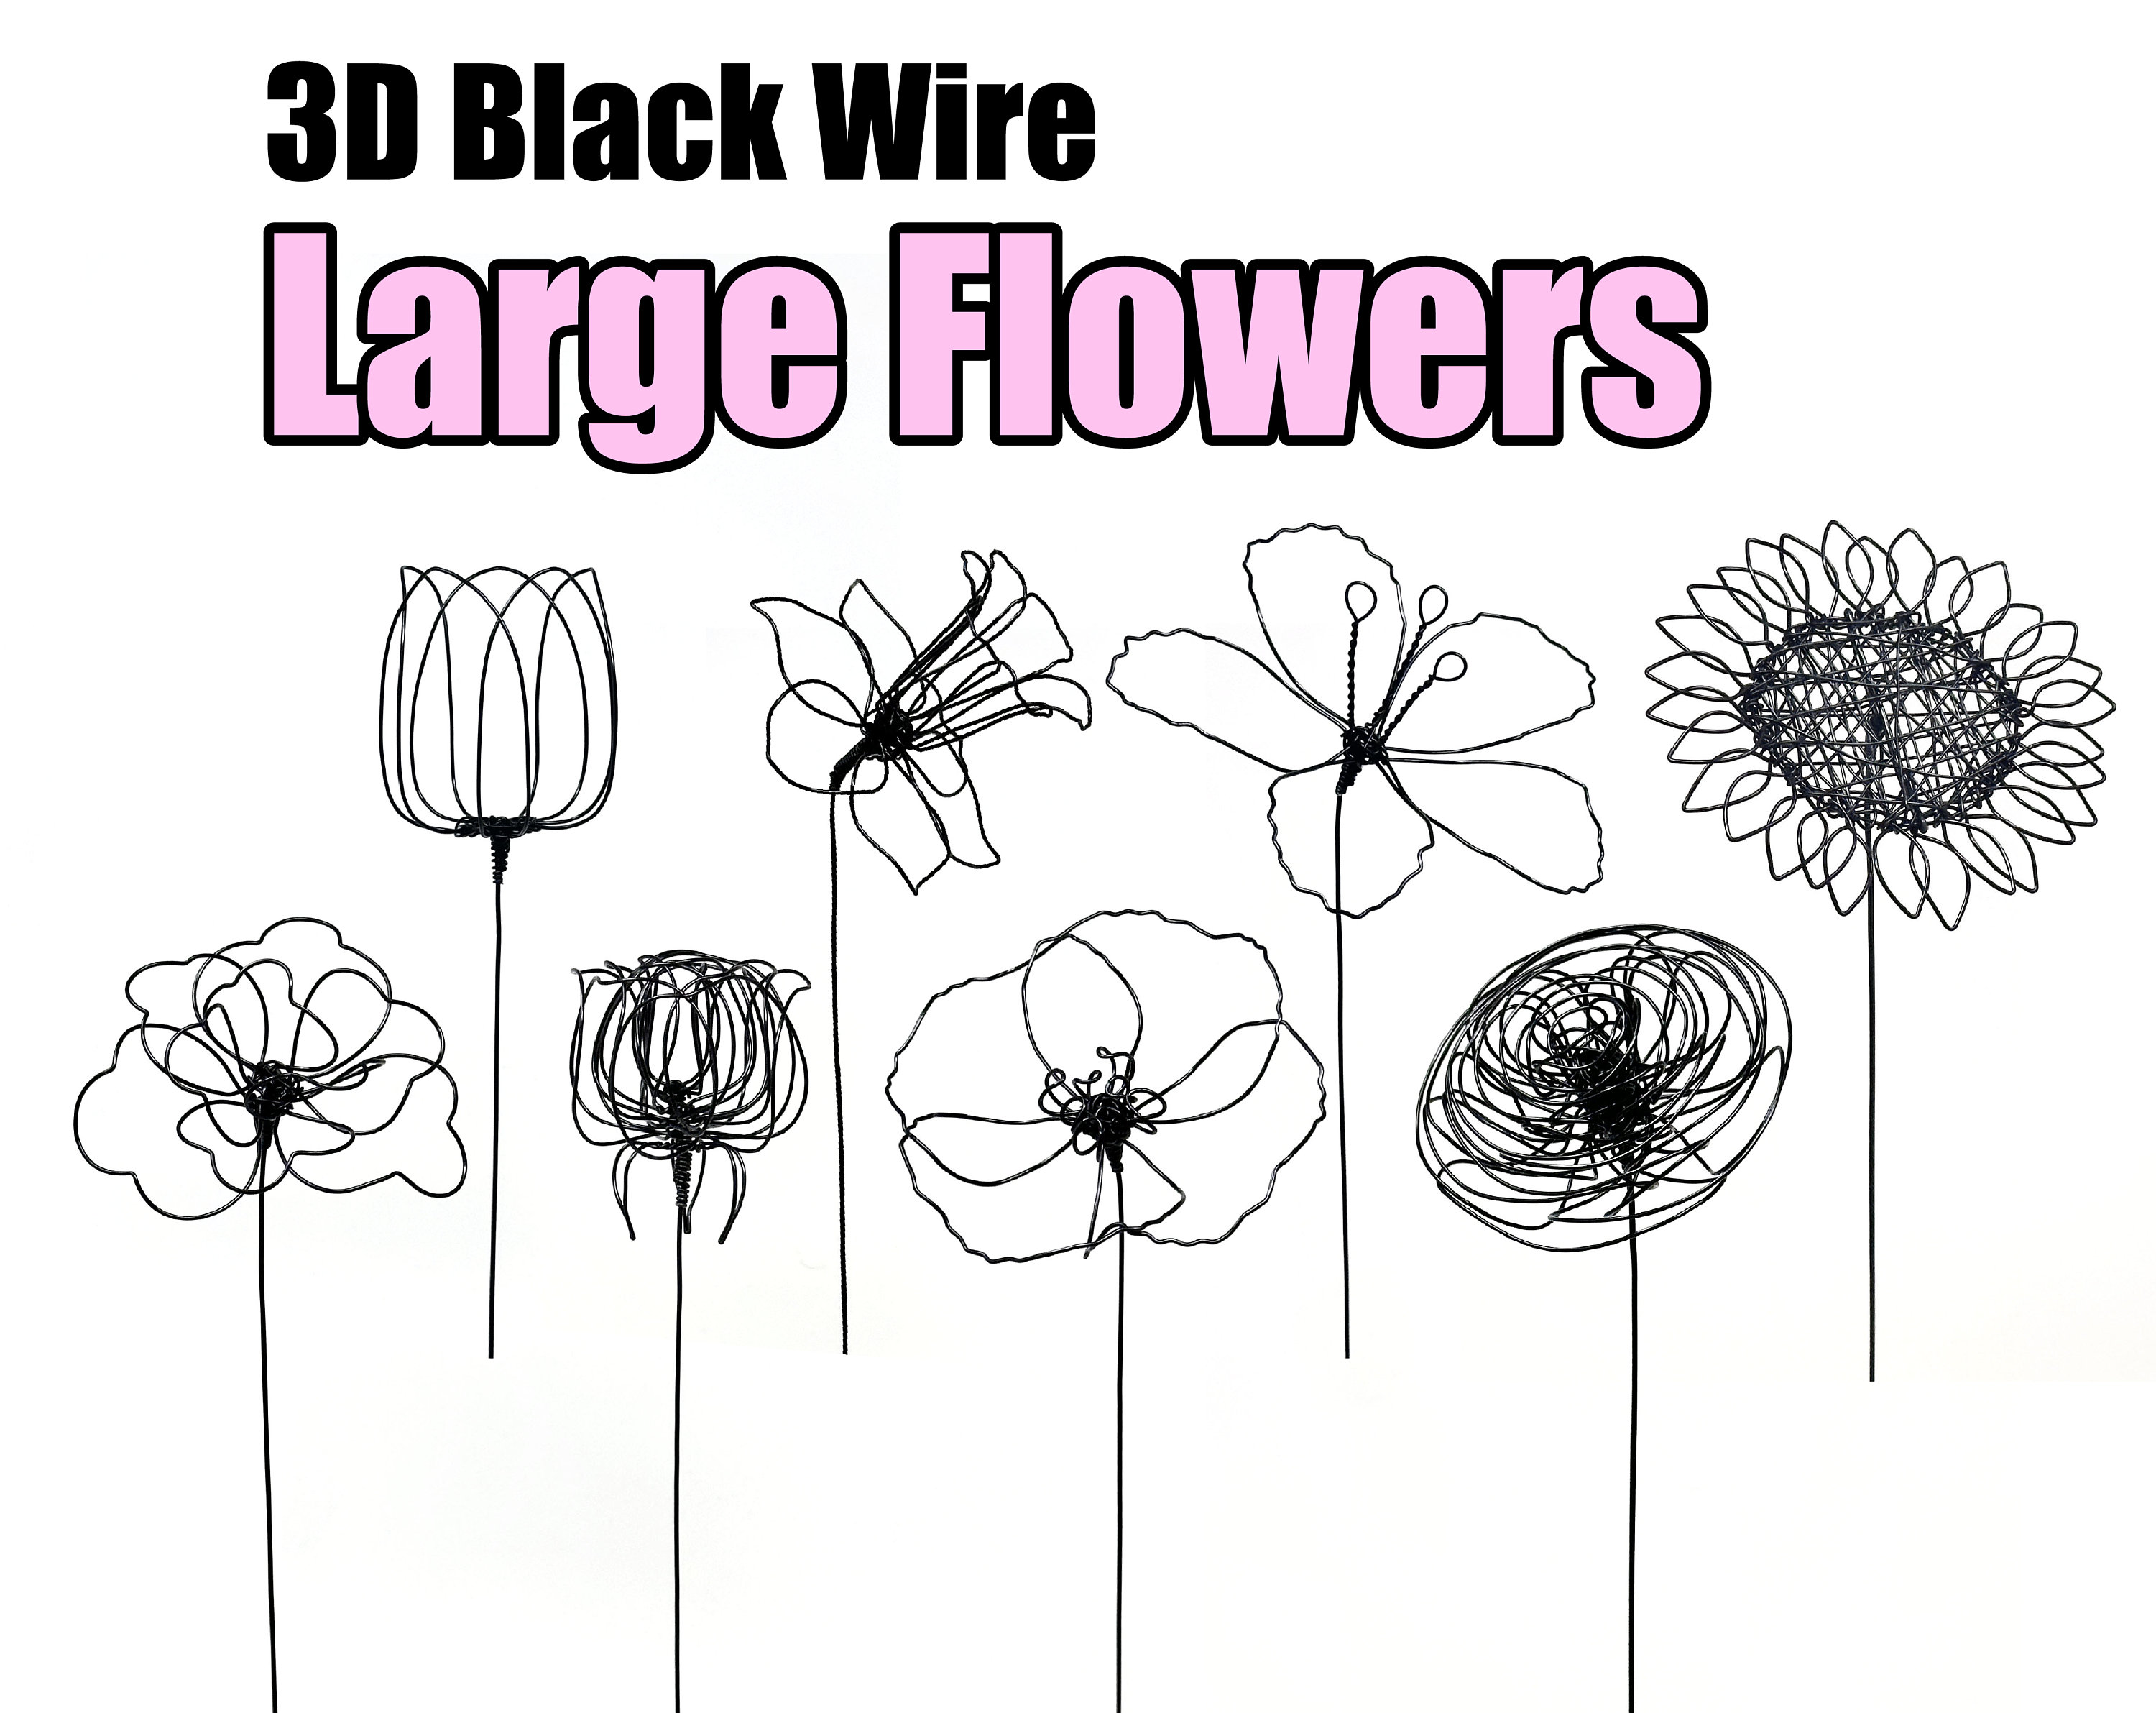 32 Gauge White Cotton Covered Floral Wire - 130 feet per bundle (39.6m) in  12 inch (30.5cm) lengths